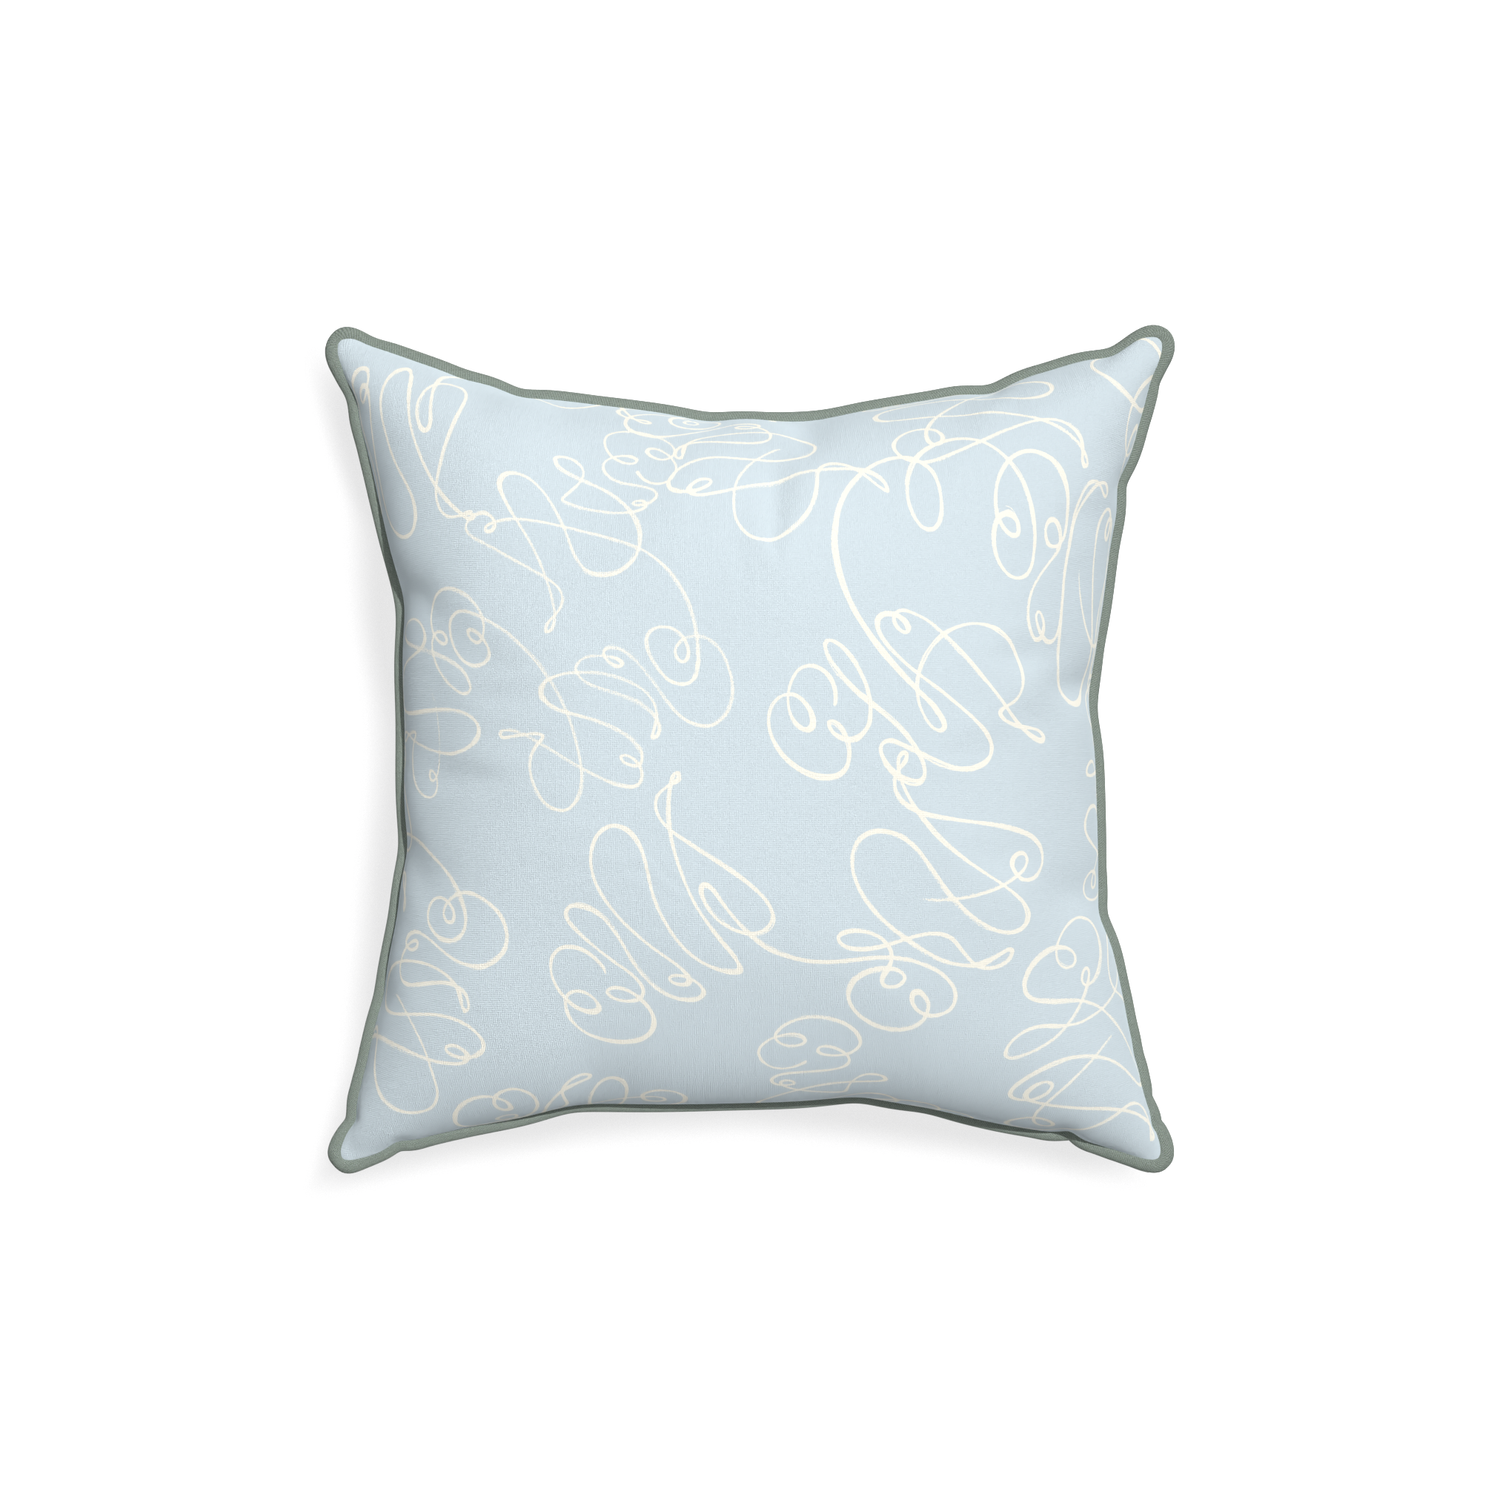 18-square mirabella custom powder blue abstractpillow with sage piping on white background